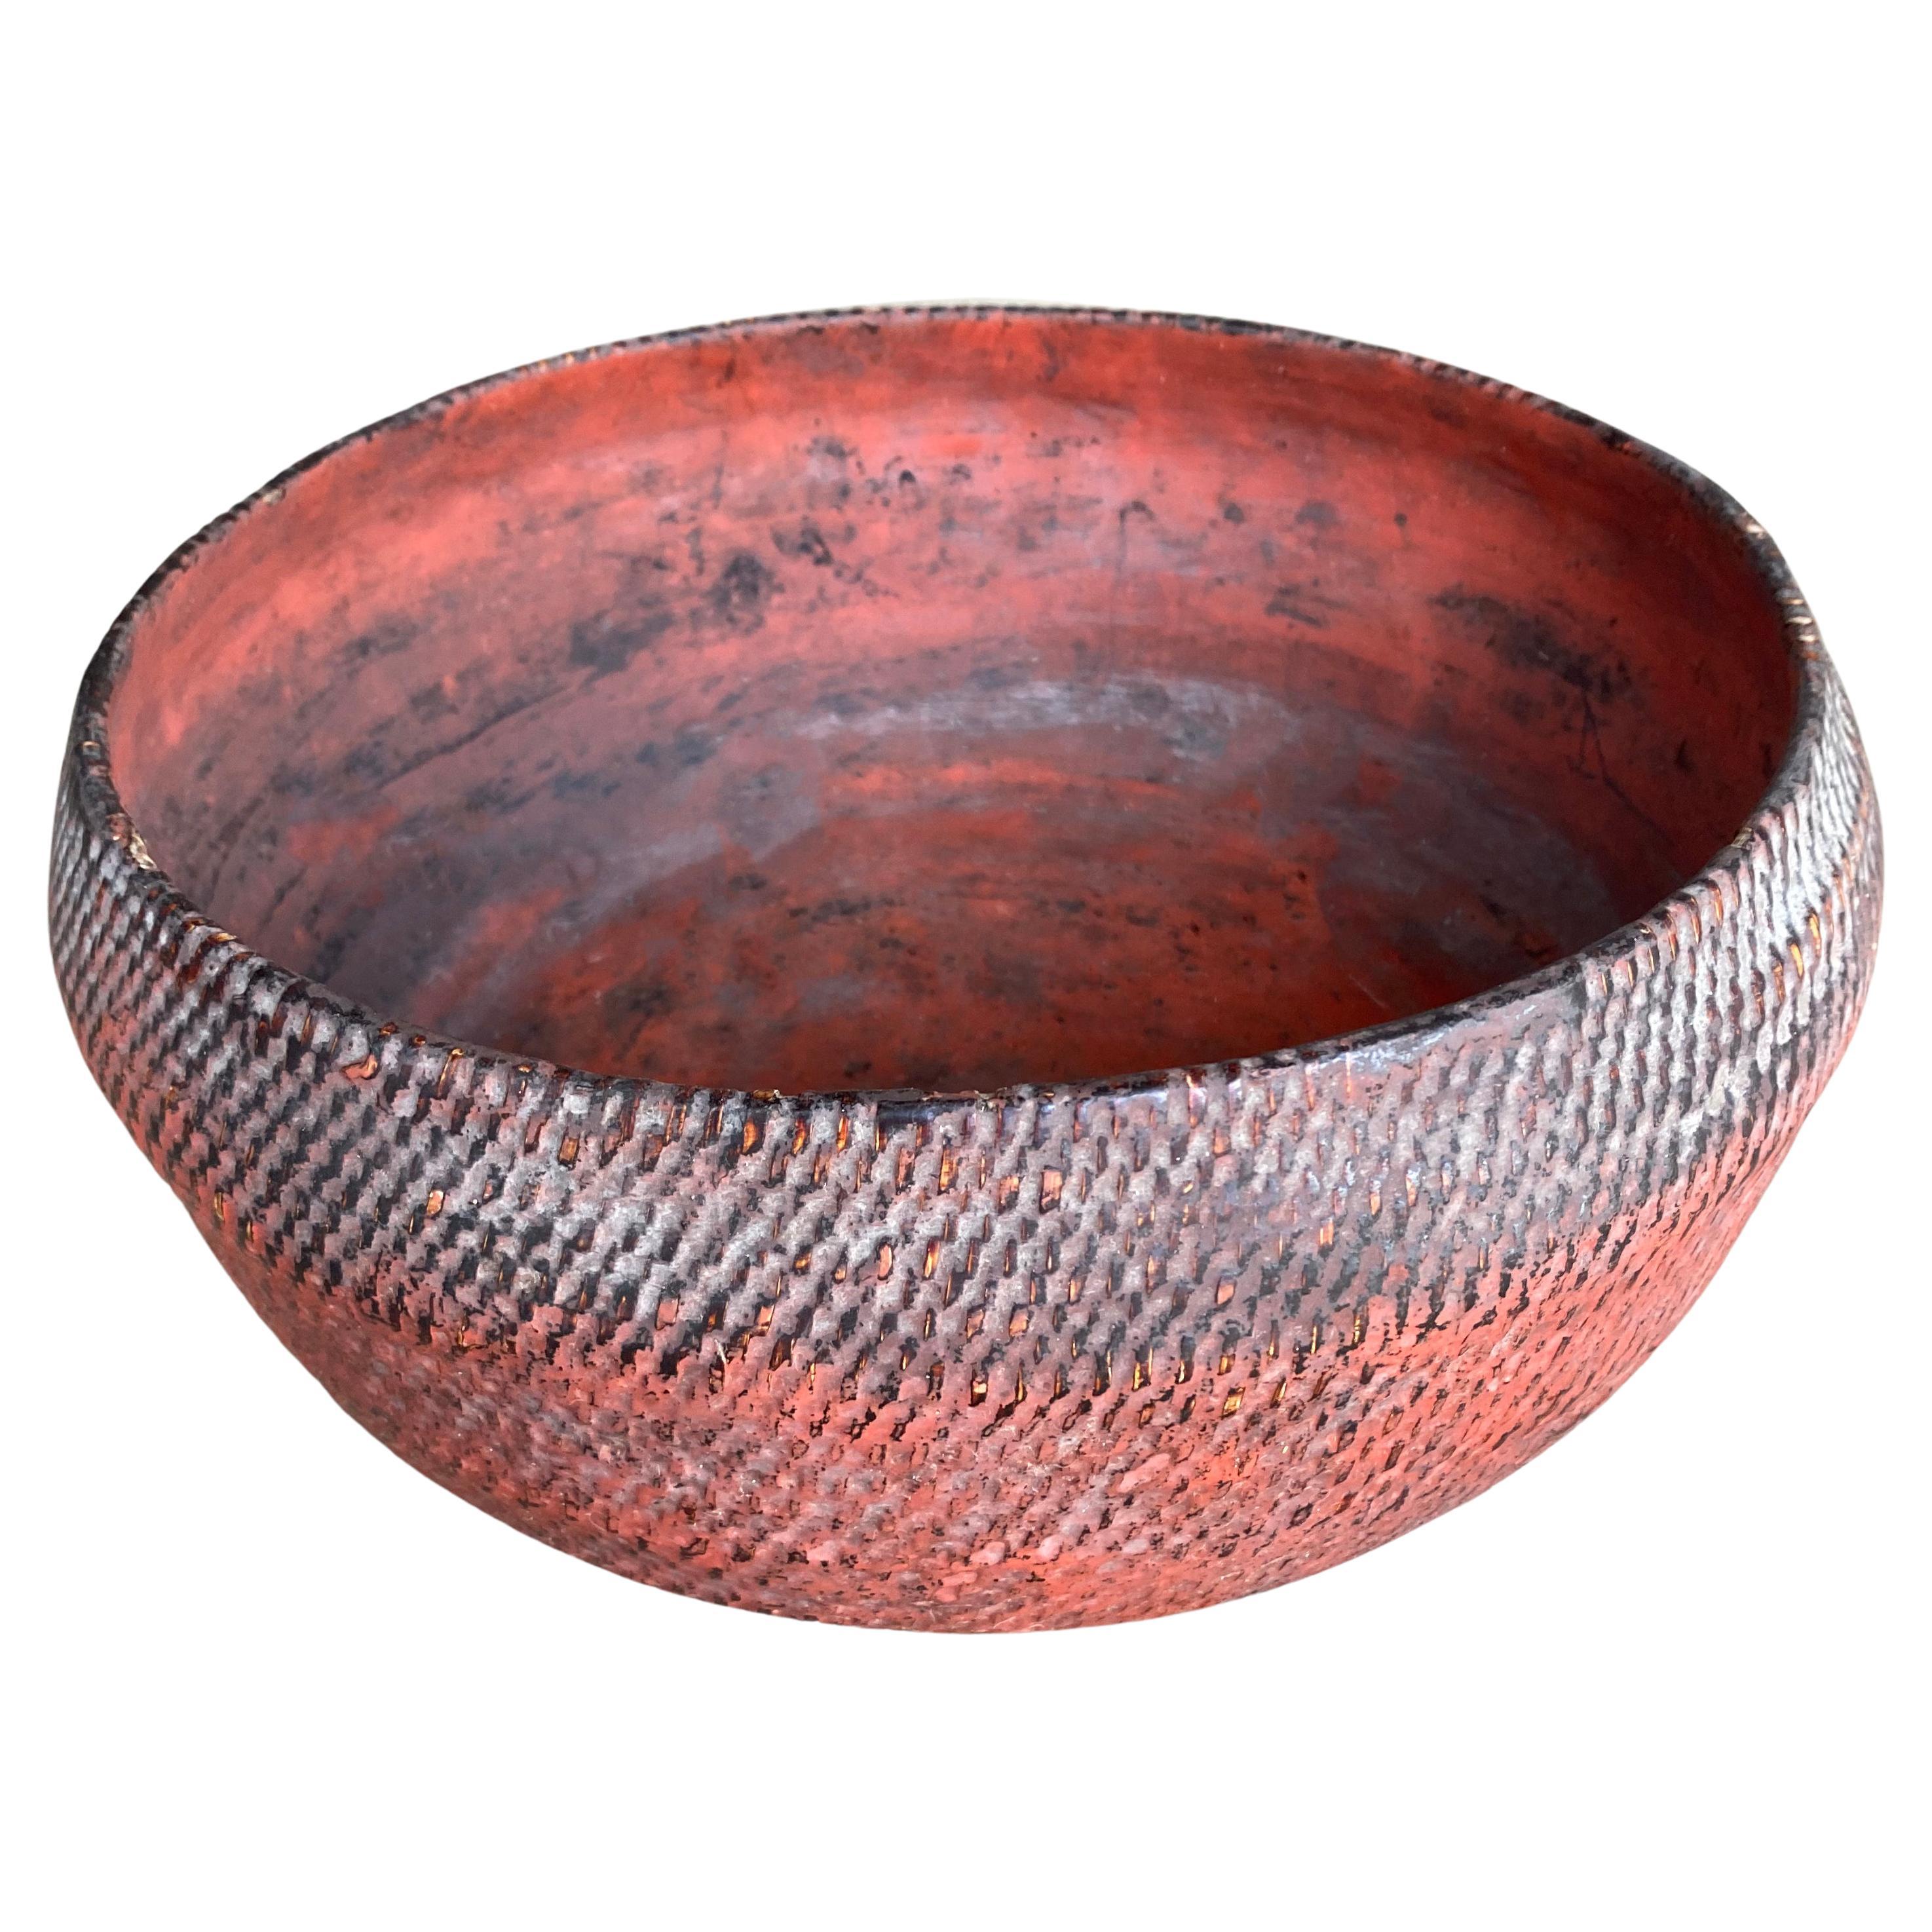 Burmese Red Lacquer Bowl with Woven Bamboo Fibres, Early 20th Century For Sale